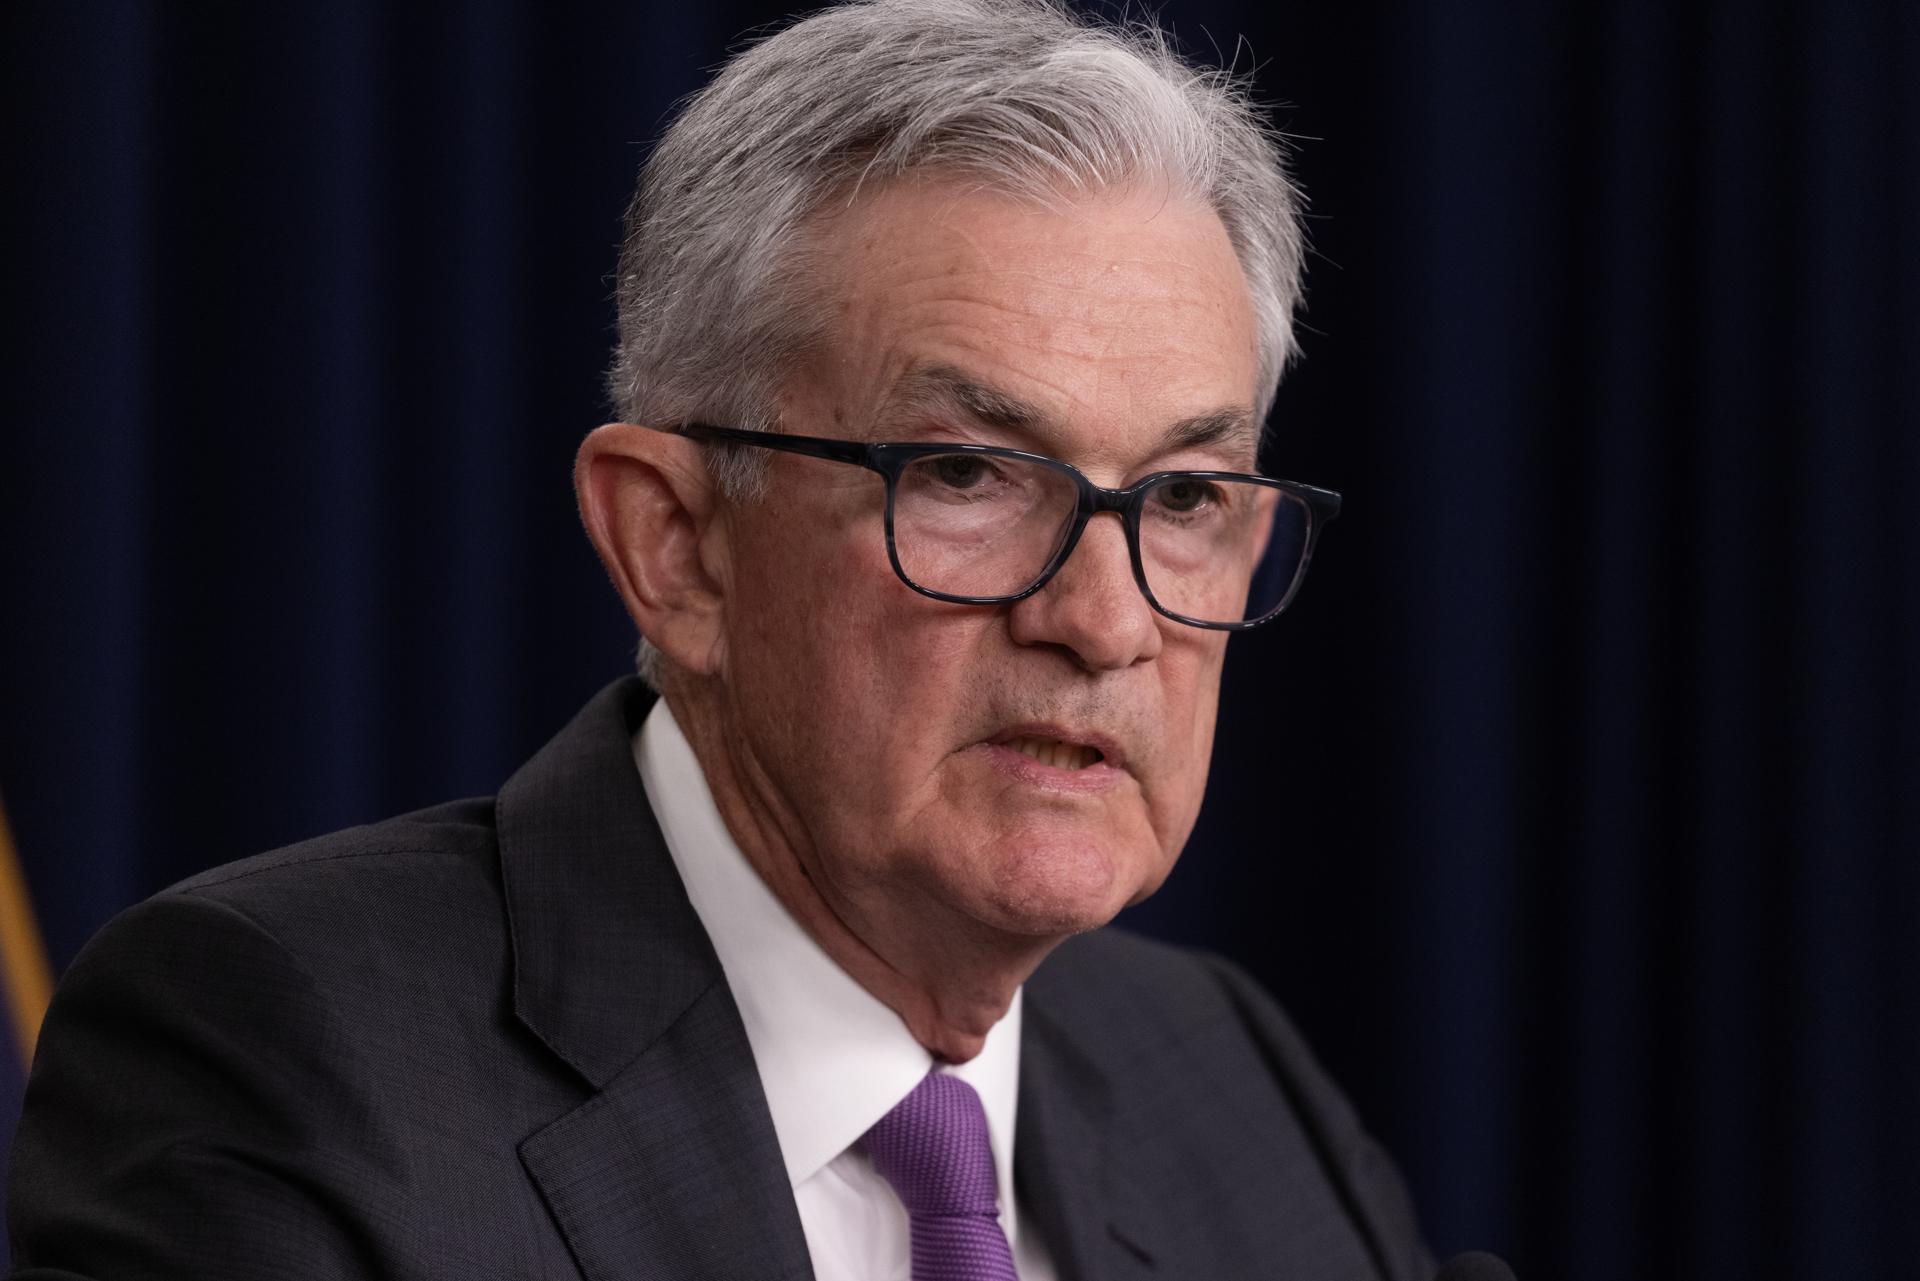 The US Federal Reserve raised its benchmark interest rate by a quarter-point on Wednesday, a move that comes after the central bank decided to pause its monetary tightening in June. EFE/EPA/MICHAEL REYNOLDS
